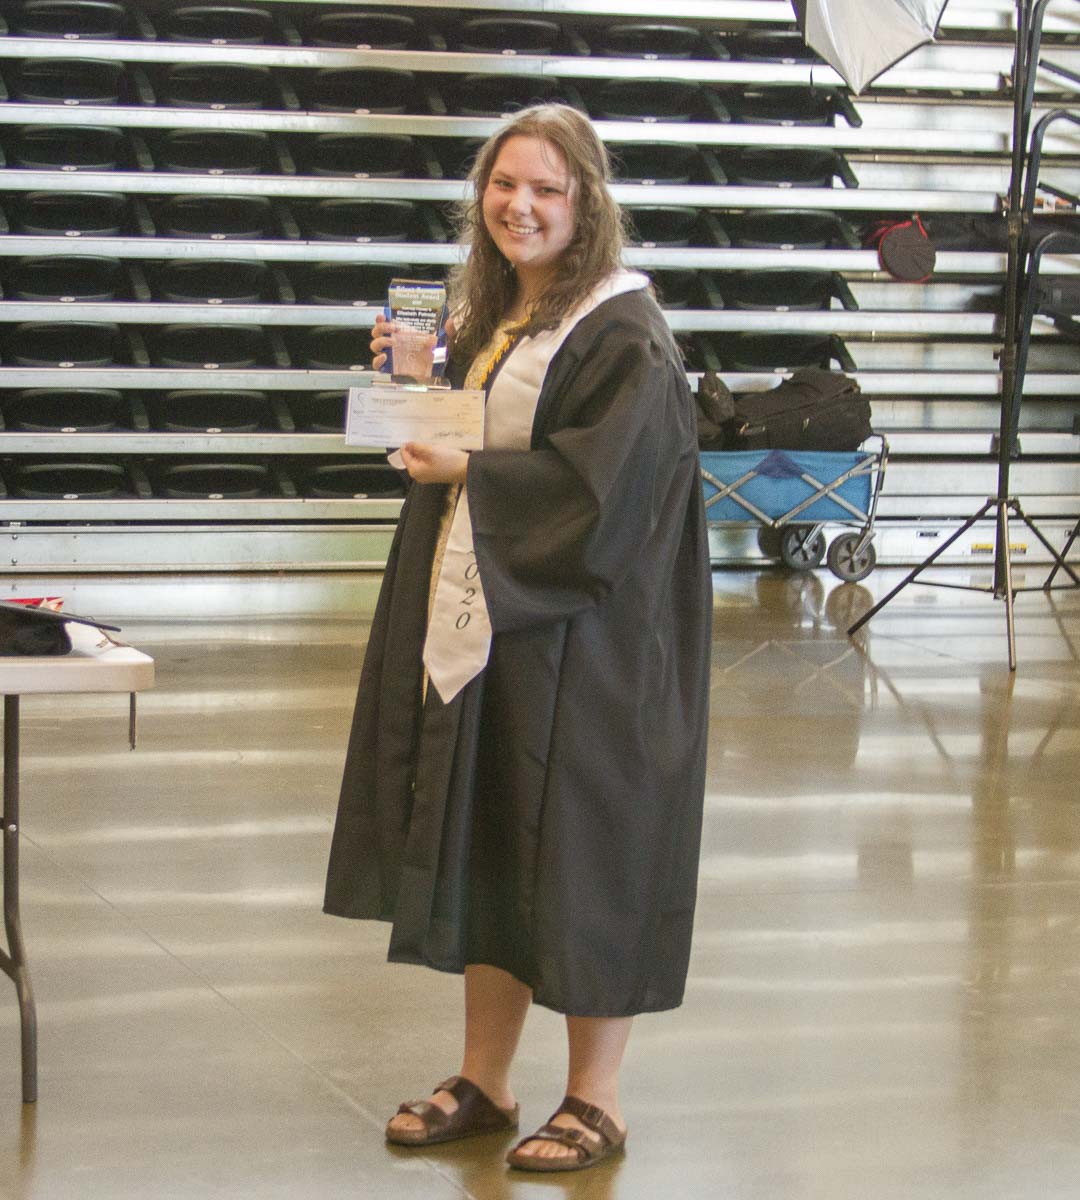 Following graduation from high school this summer, Elisabeth Patnode received the award for the countless hours of community service she performed. Photo courtesy of Woodland Public Schools